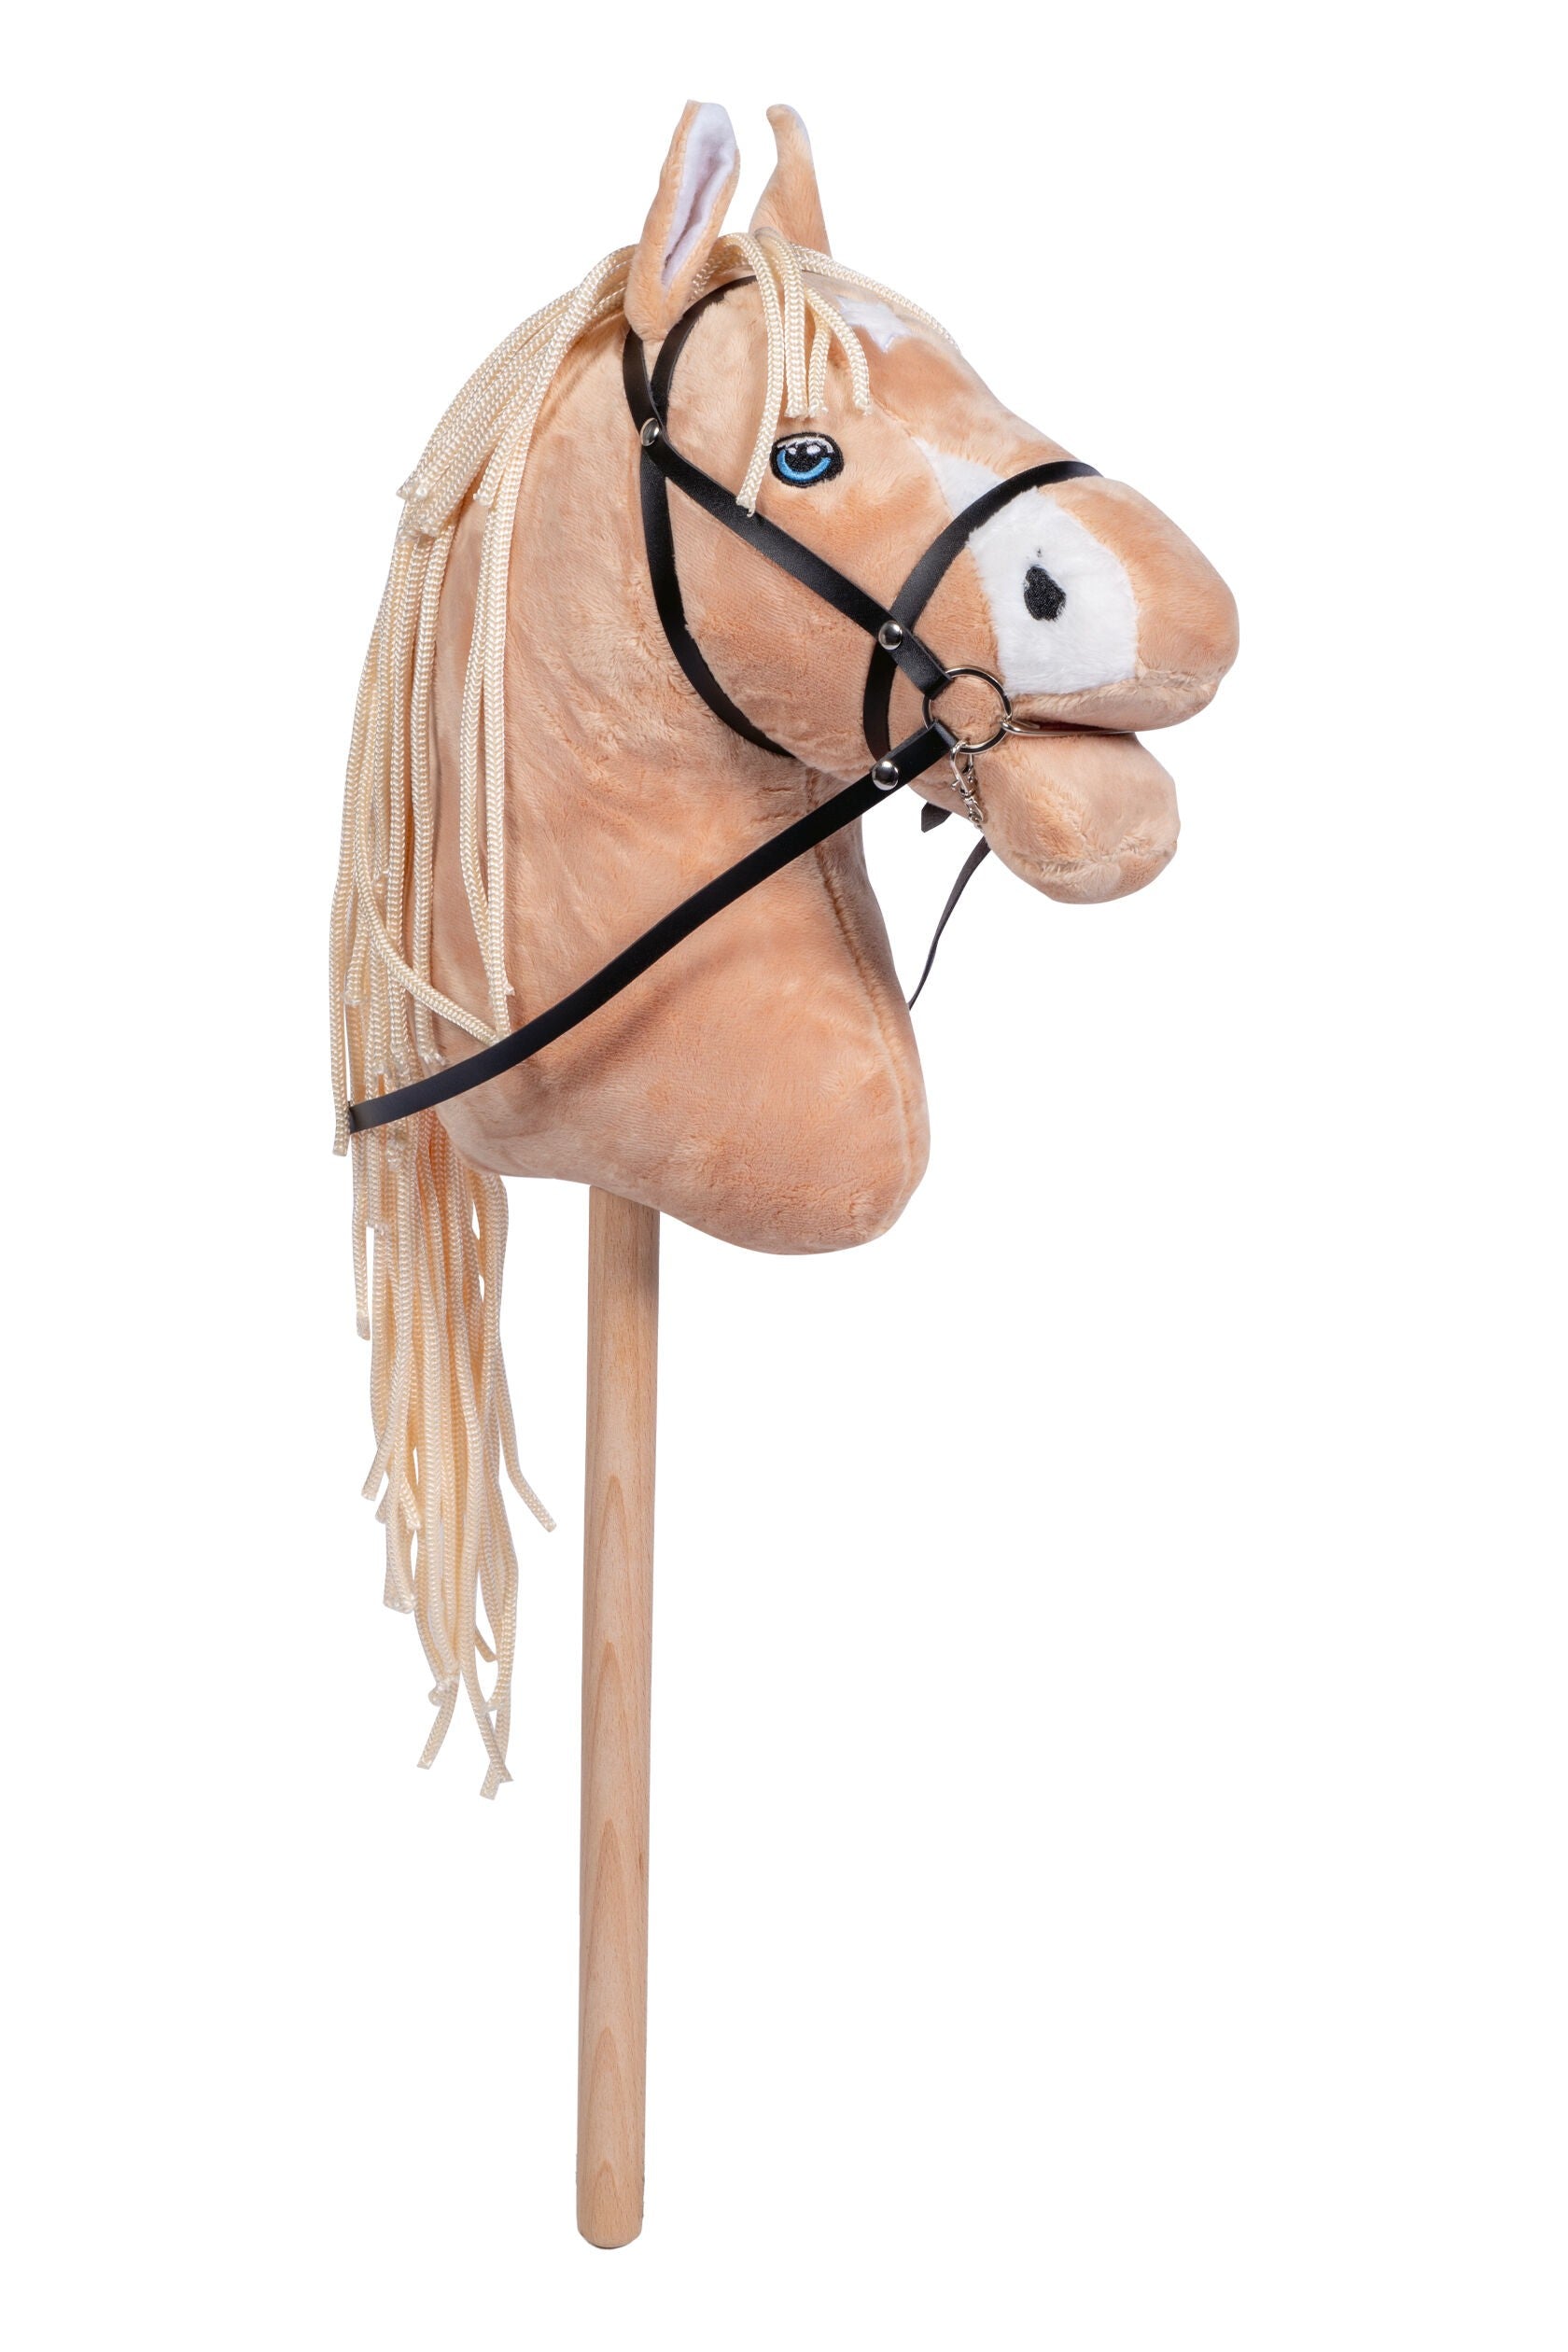 Stick Horse, Plush Handcrafted Hobby Horse for Toddlers & Preschoolers